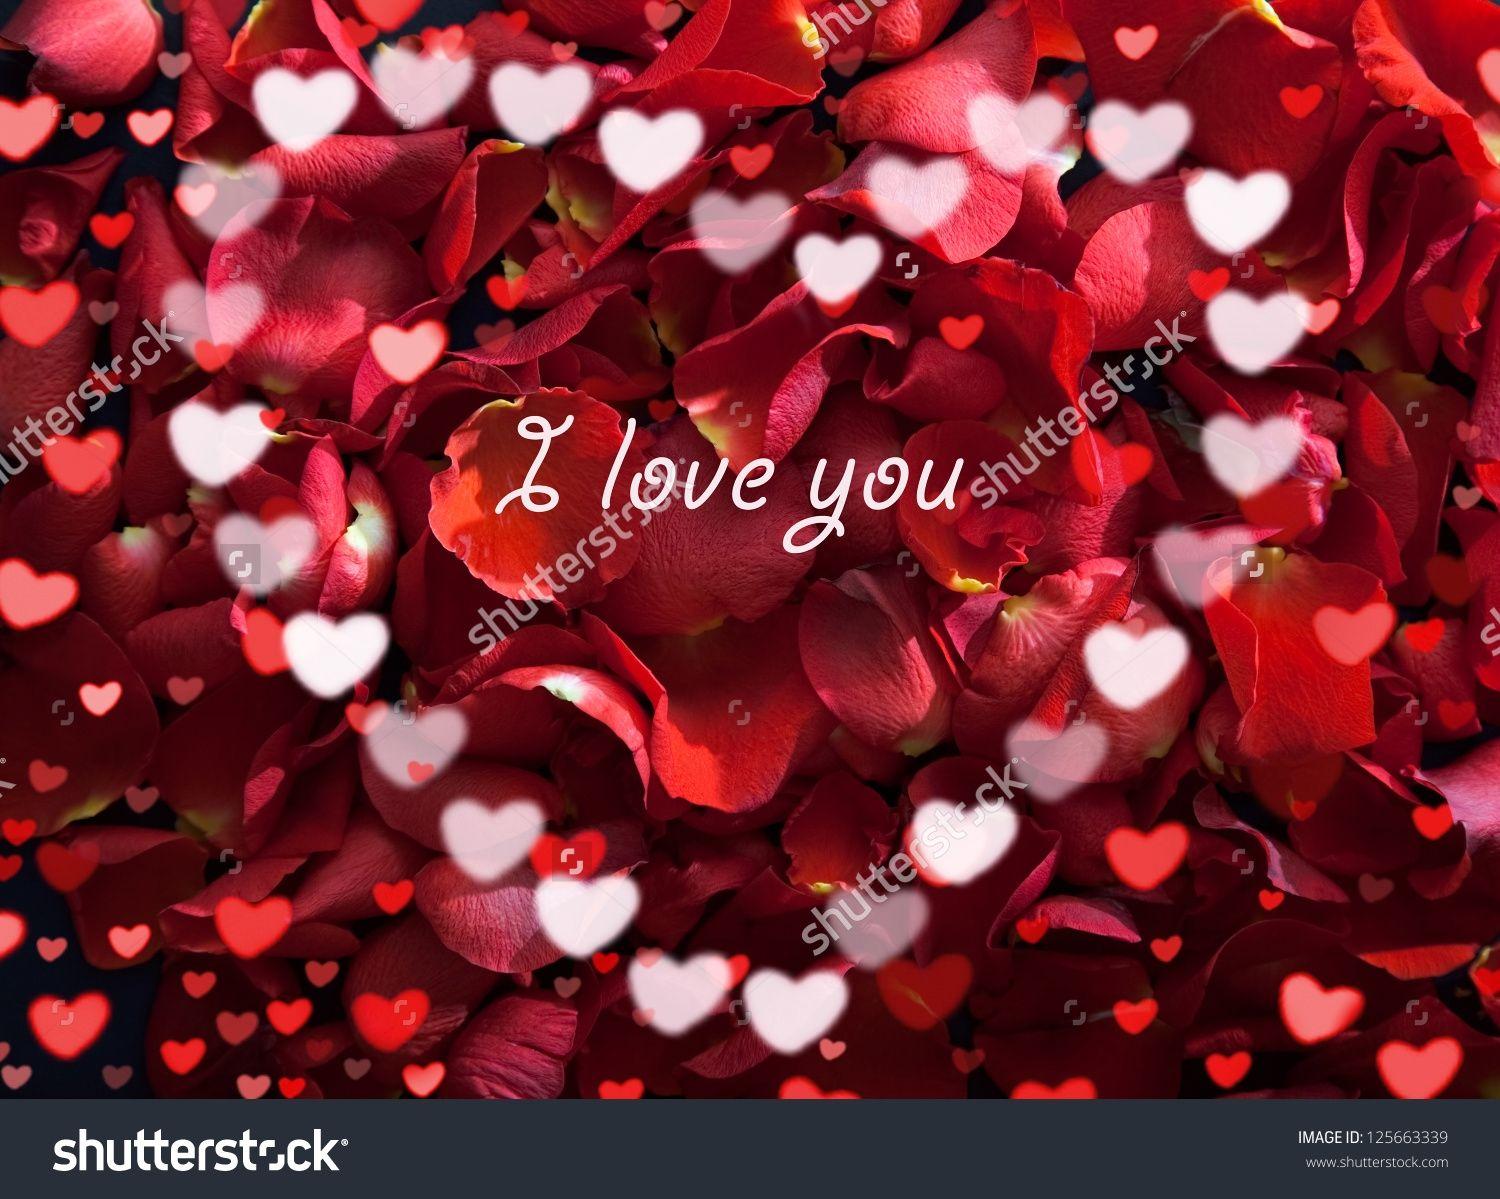 New picture of i love you roses picture of i love you roses